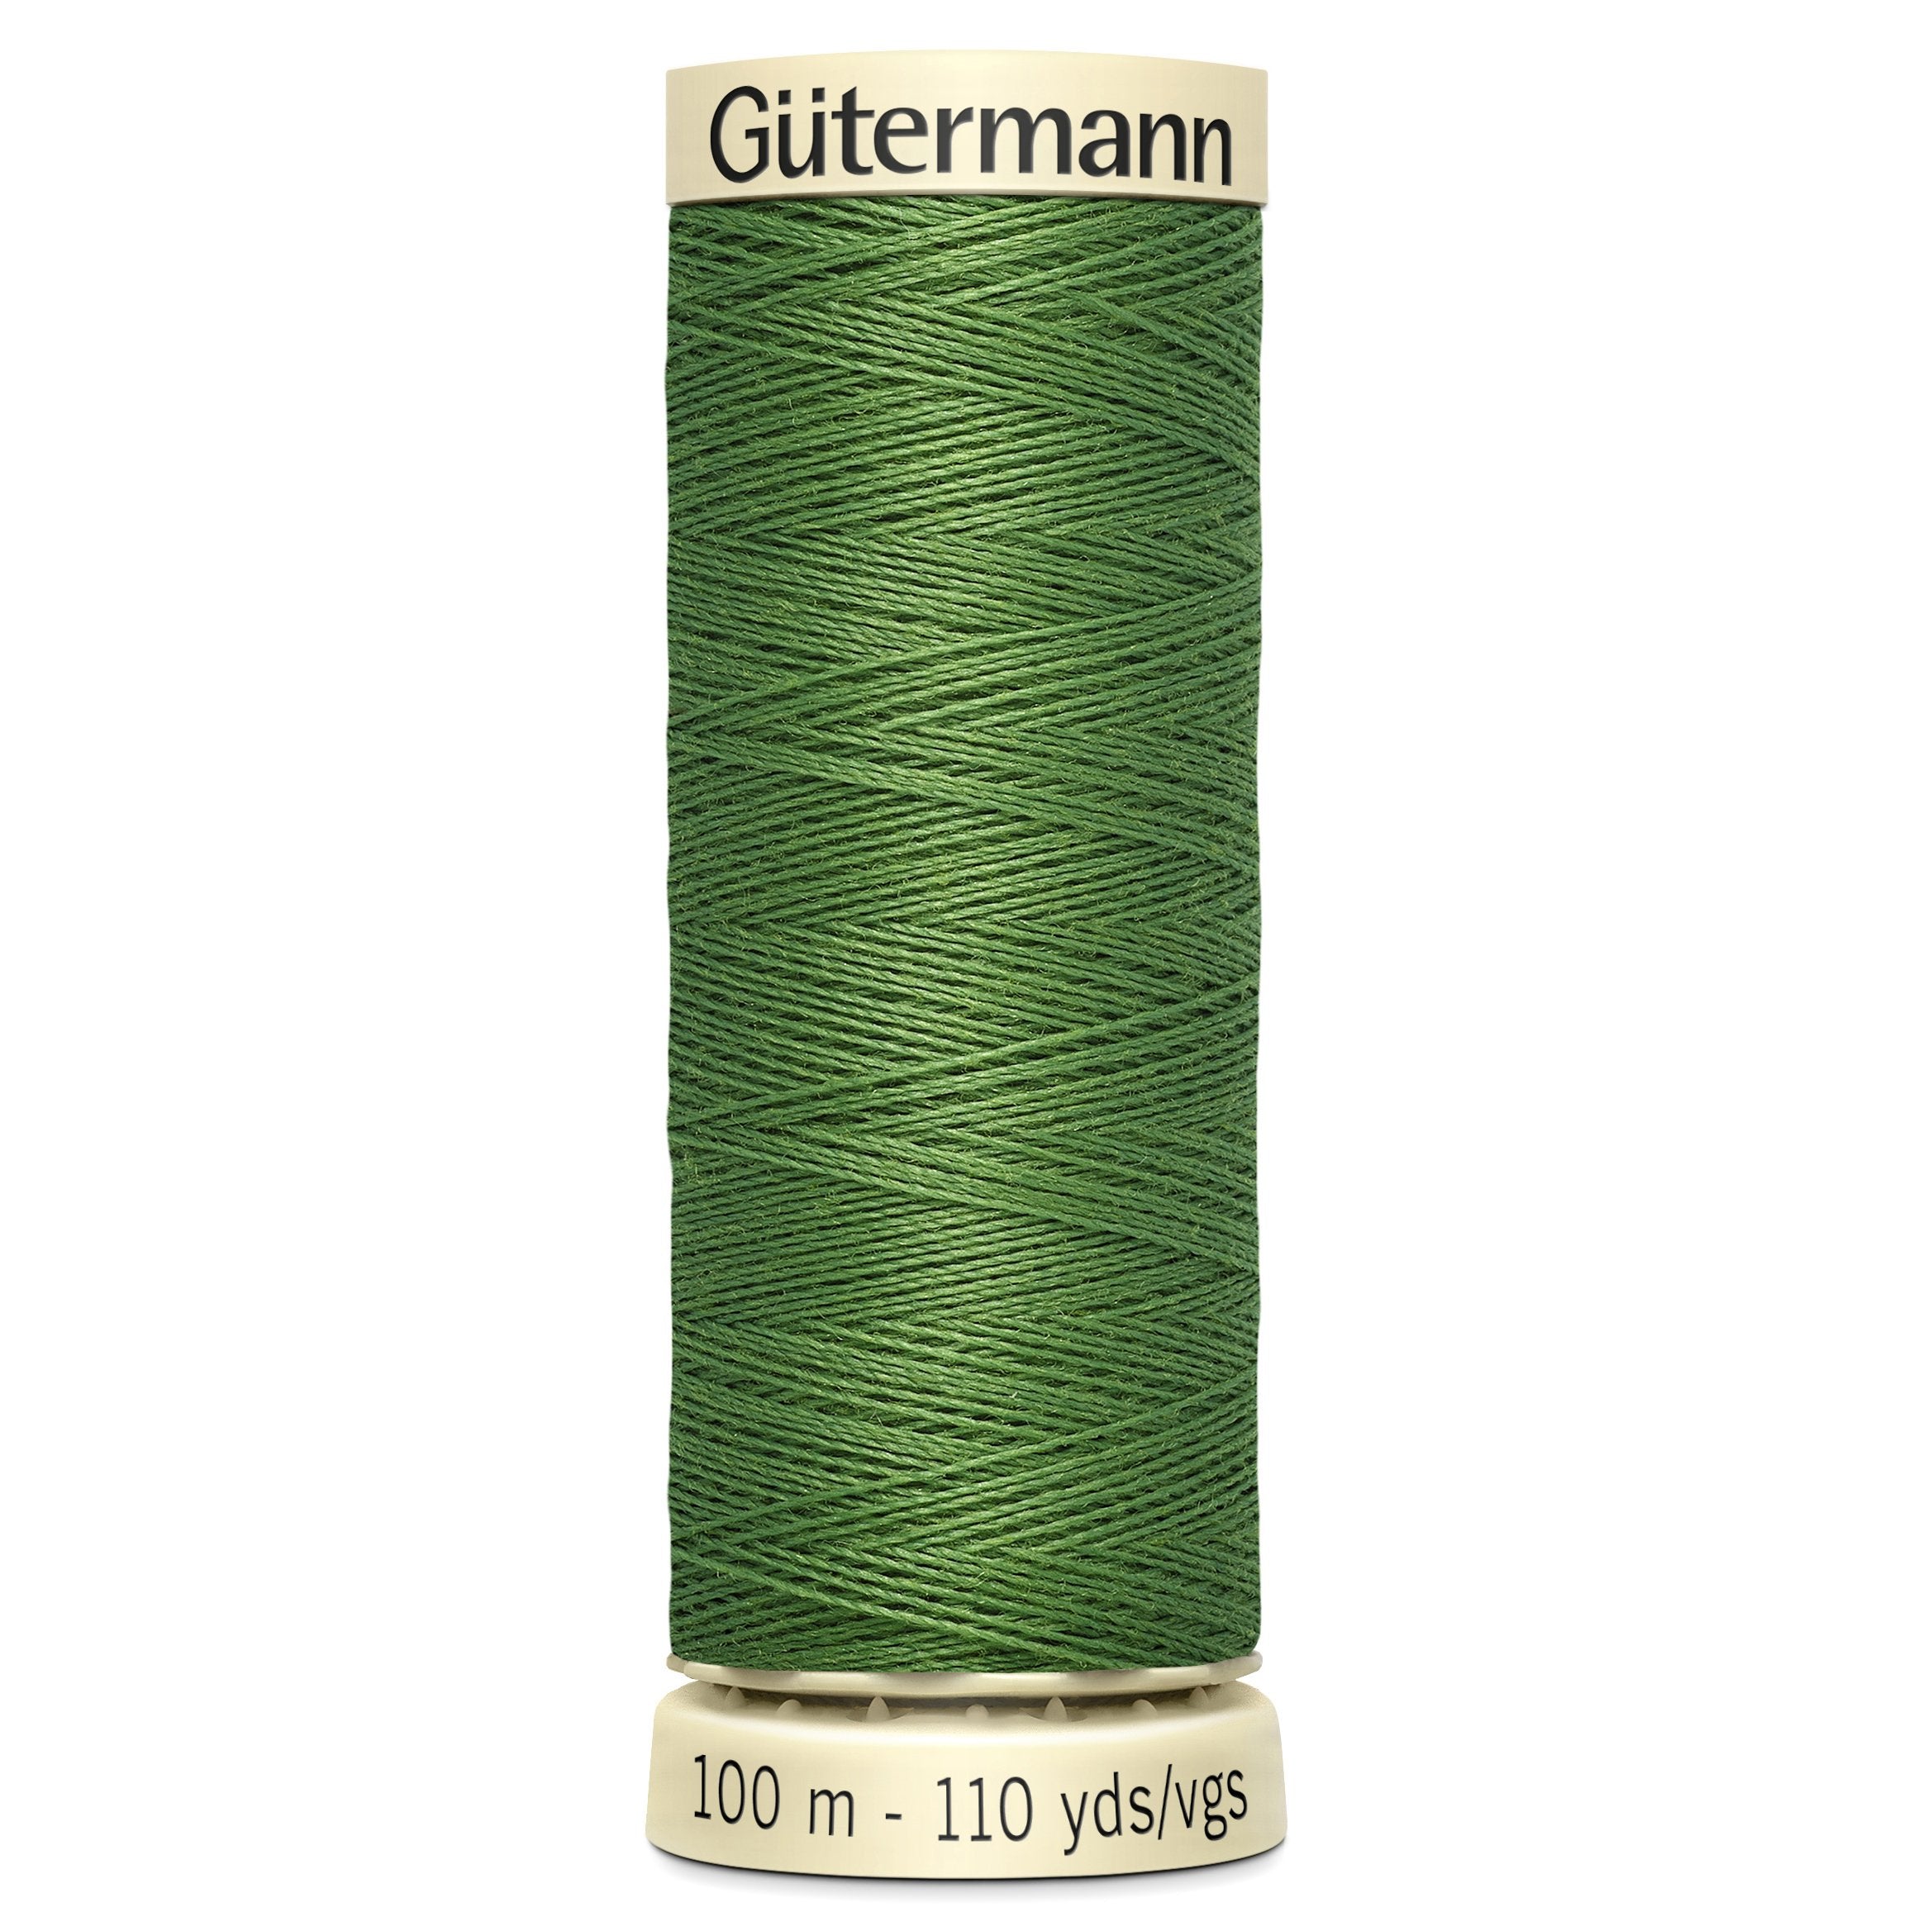 Gutermann Sew All Thread colour 919 Mid Green from Jaycotts Sewing Supplies